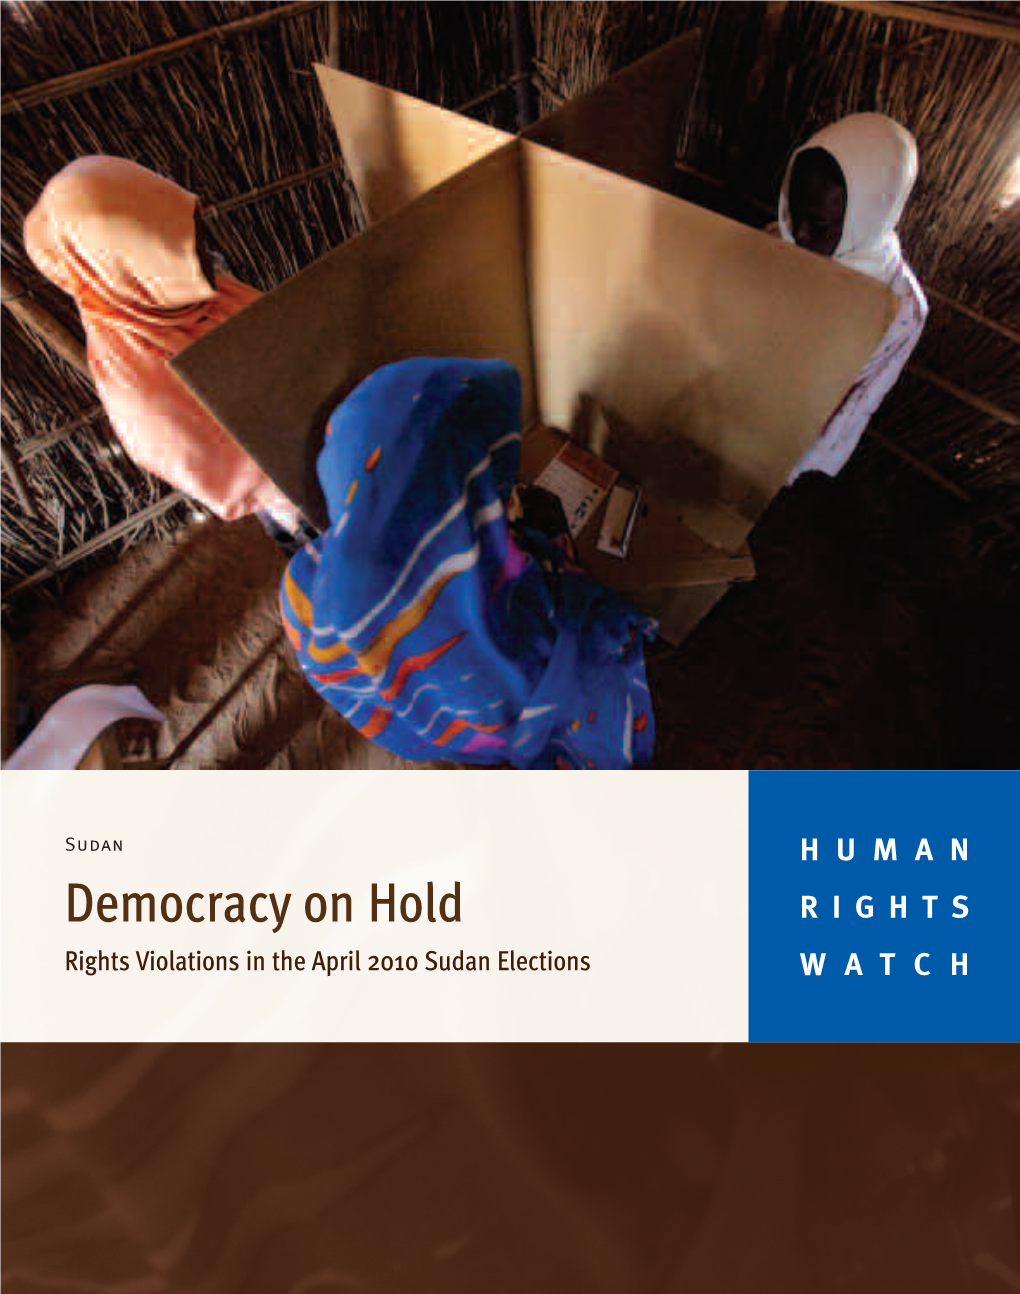 Democracy on Hold RIGHTS Rights Violations in the April 2010 Sudan Elections WATCH